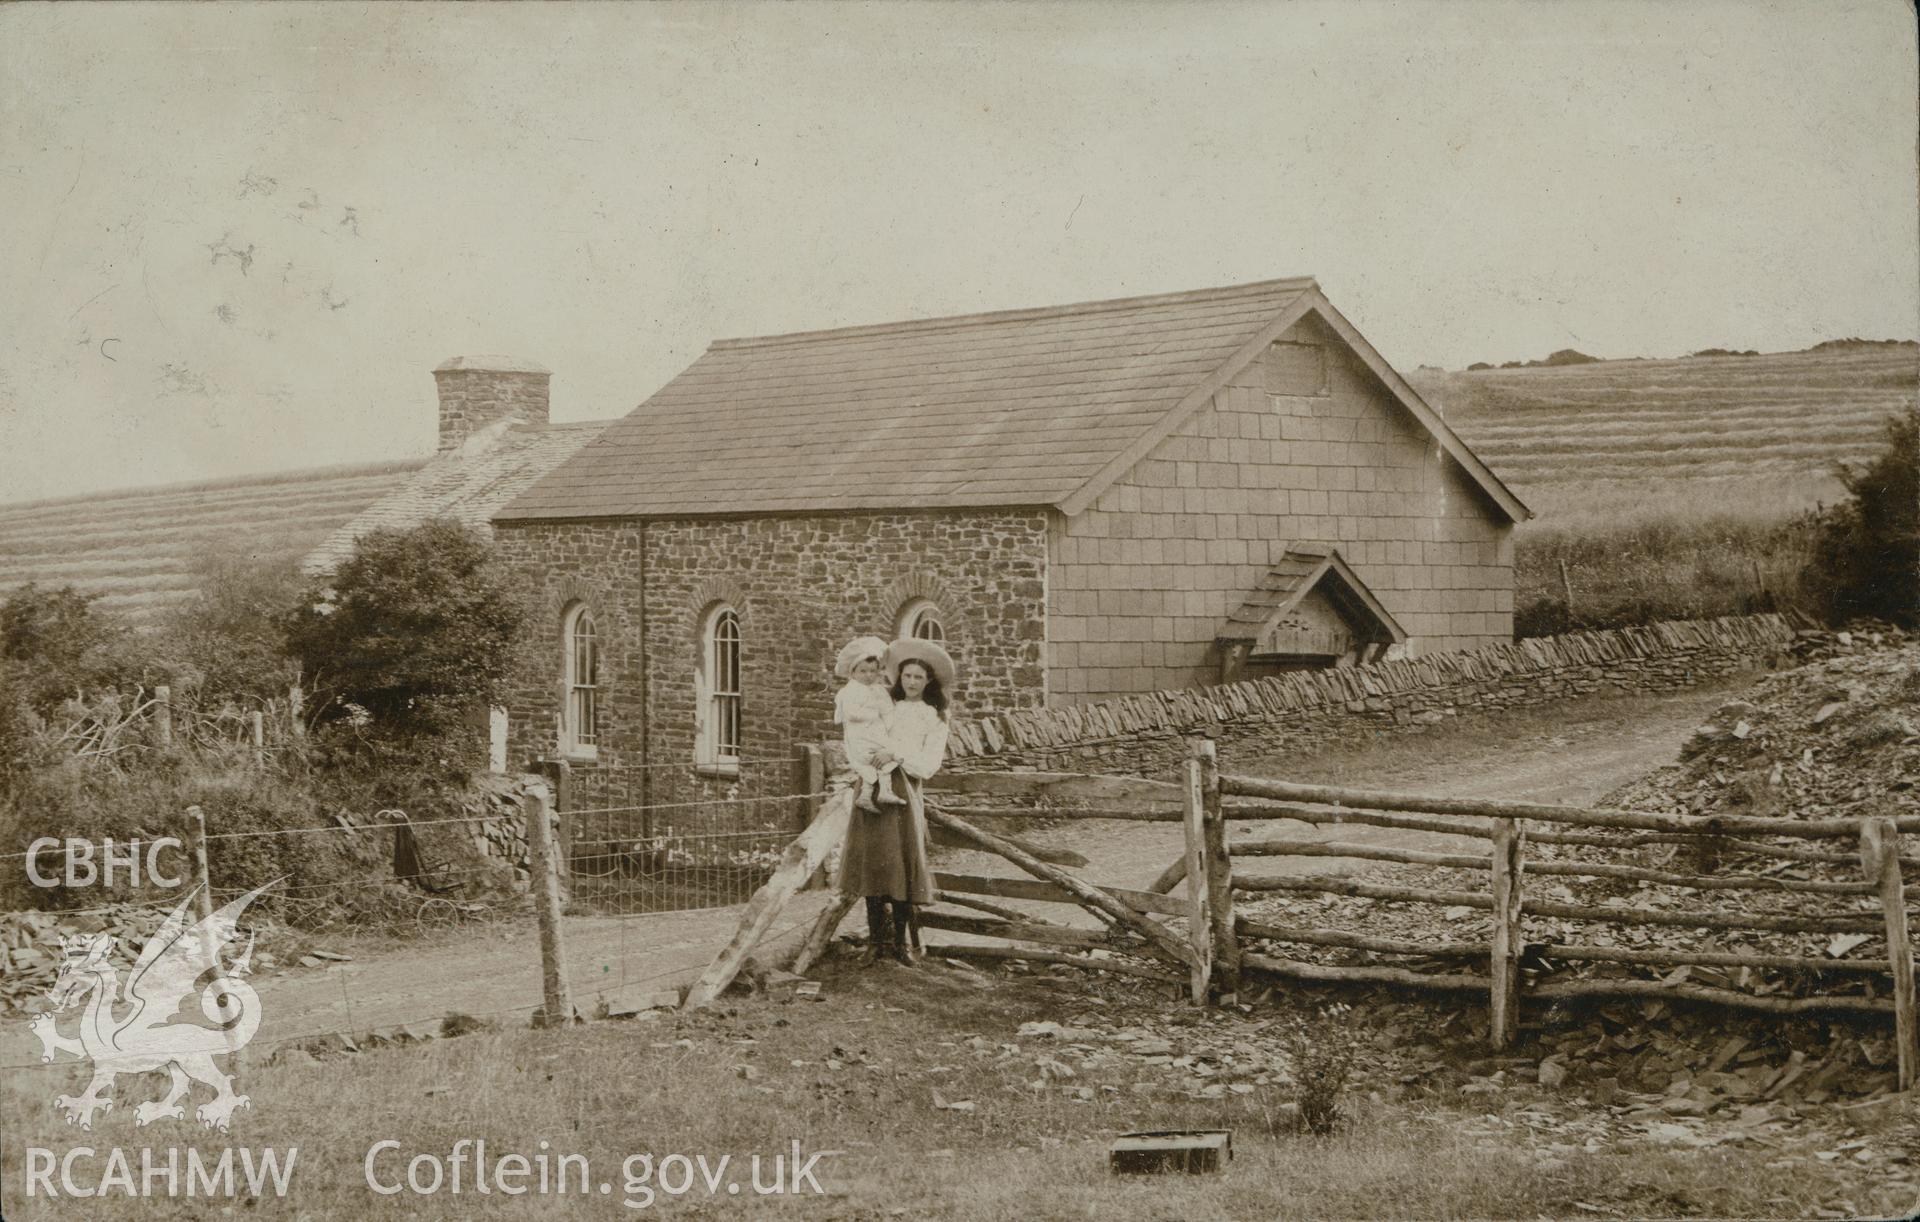 Digital copy of monochrome postcard showing exterior view of Pant Glas Calvinistic Methodist chapel, Pen-Rhiw, Llanilar, with a woman and infant in the foreground. Franked on 14th July 1905. Loaned for copying by Thomas Lloyd.